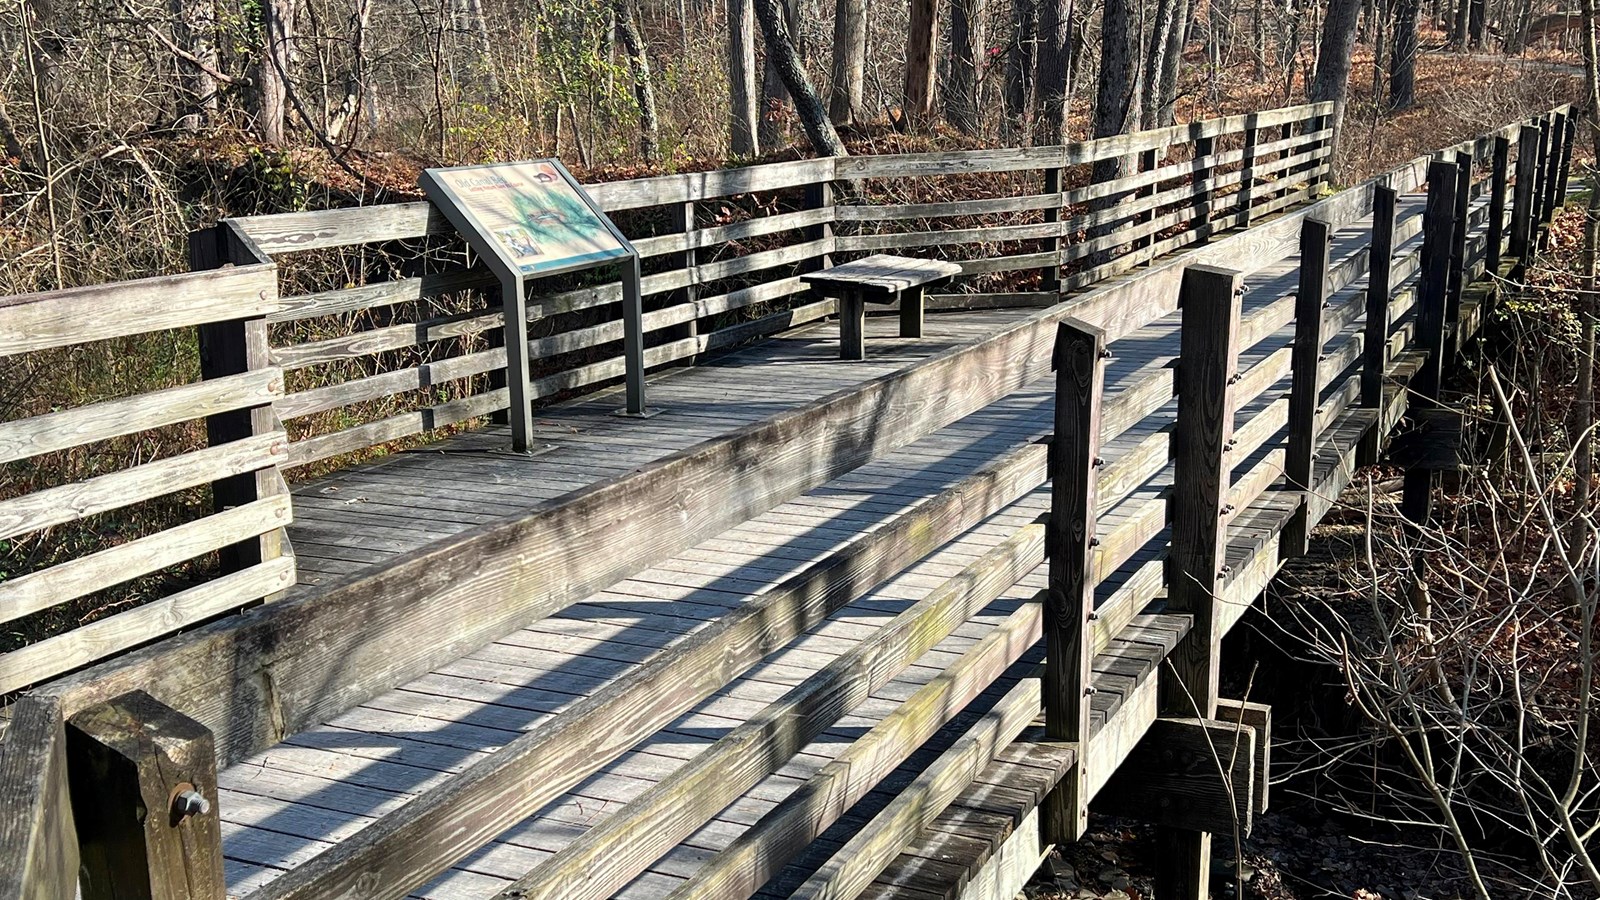 An angled view of a wooden bridge with a bench and exhibit panel, over a dry, woodland streambed.